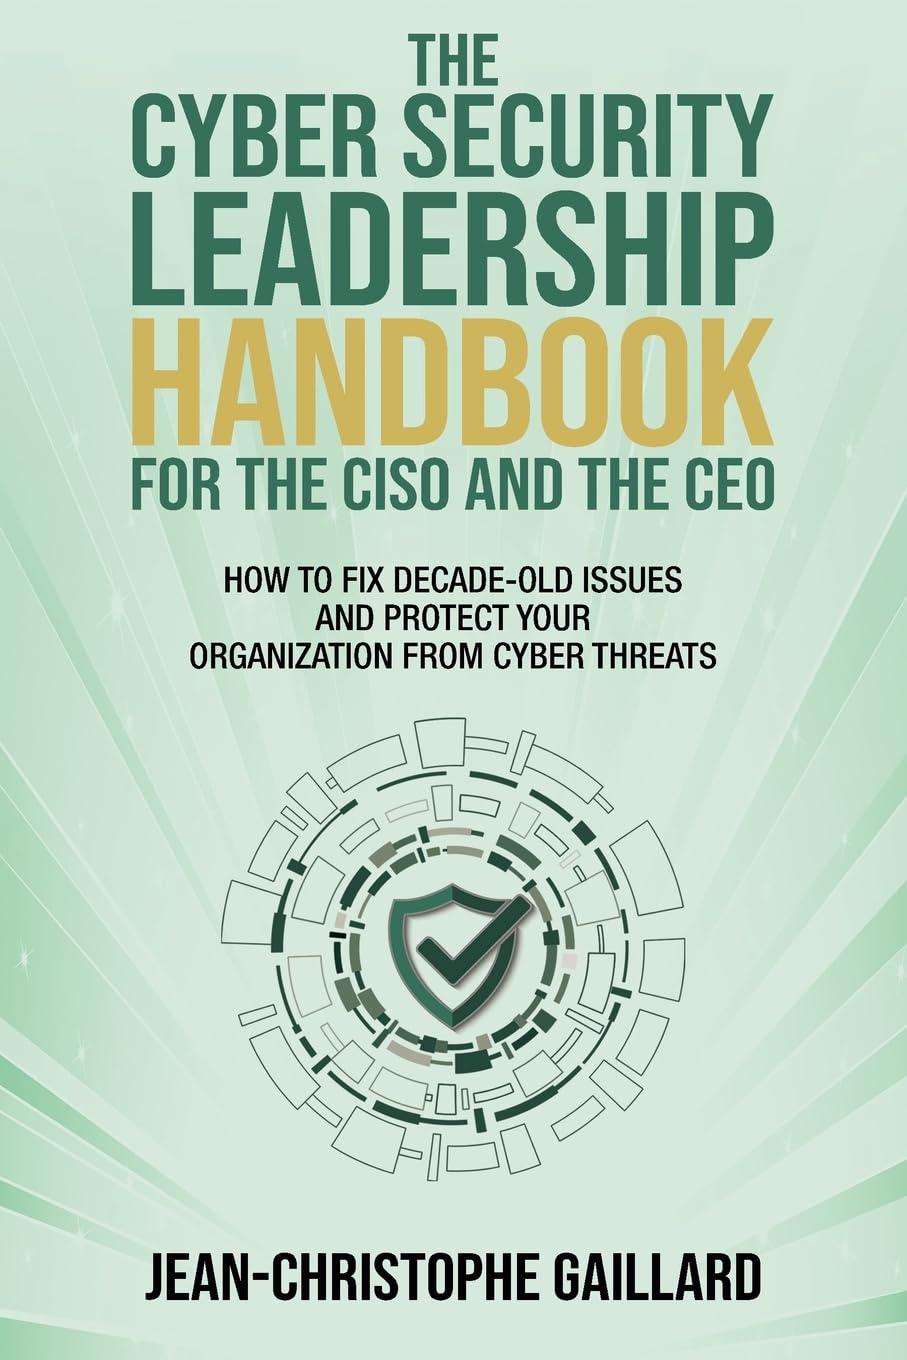 The CyberSecurity Leadership Handbook For The CISO And The CEO How To Fix Decade Old Issues And Protect Your Organization From Cyber Threats